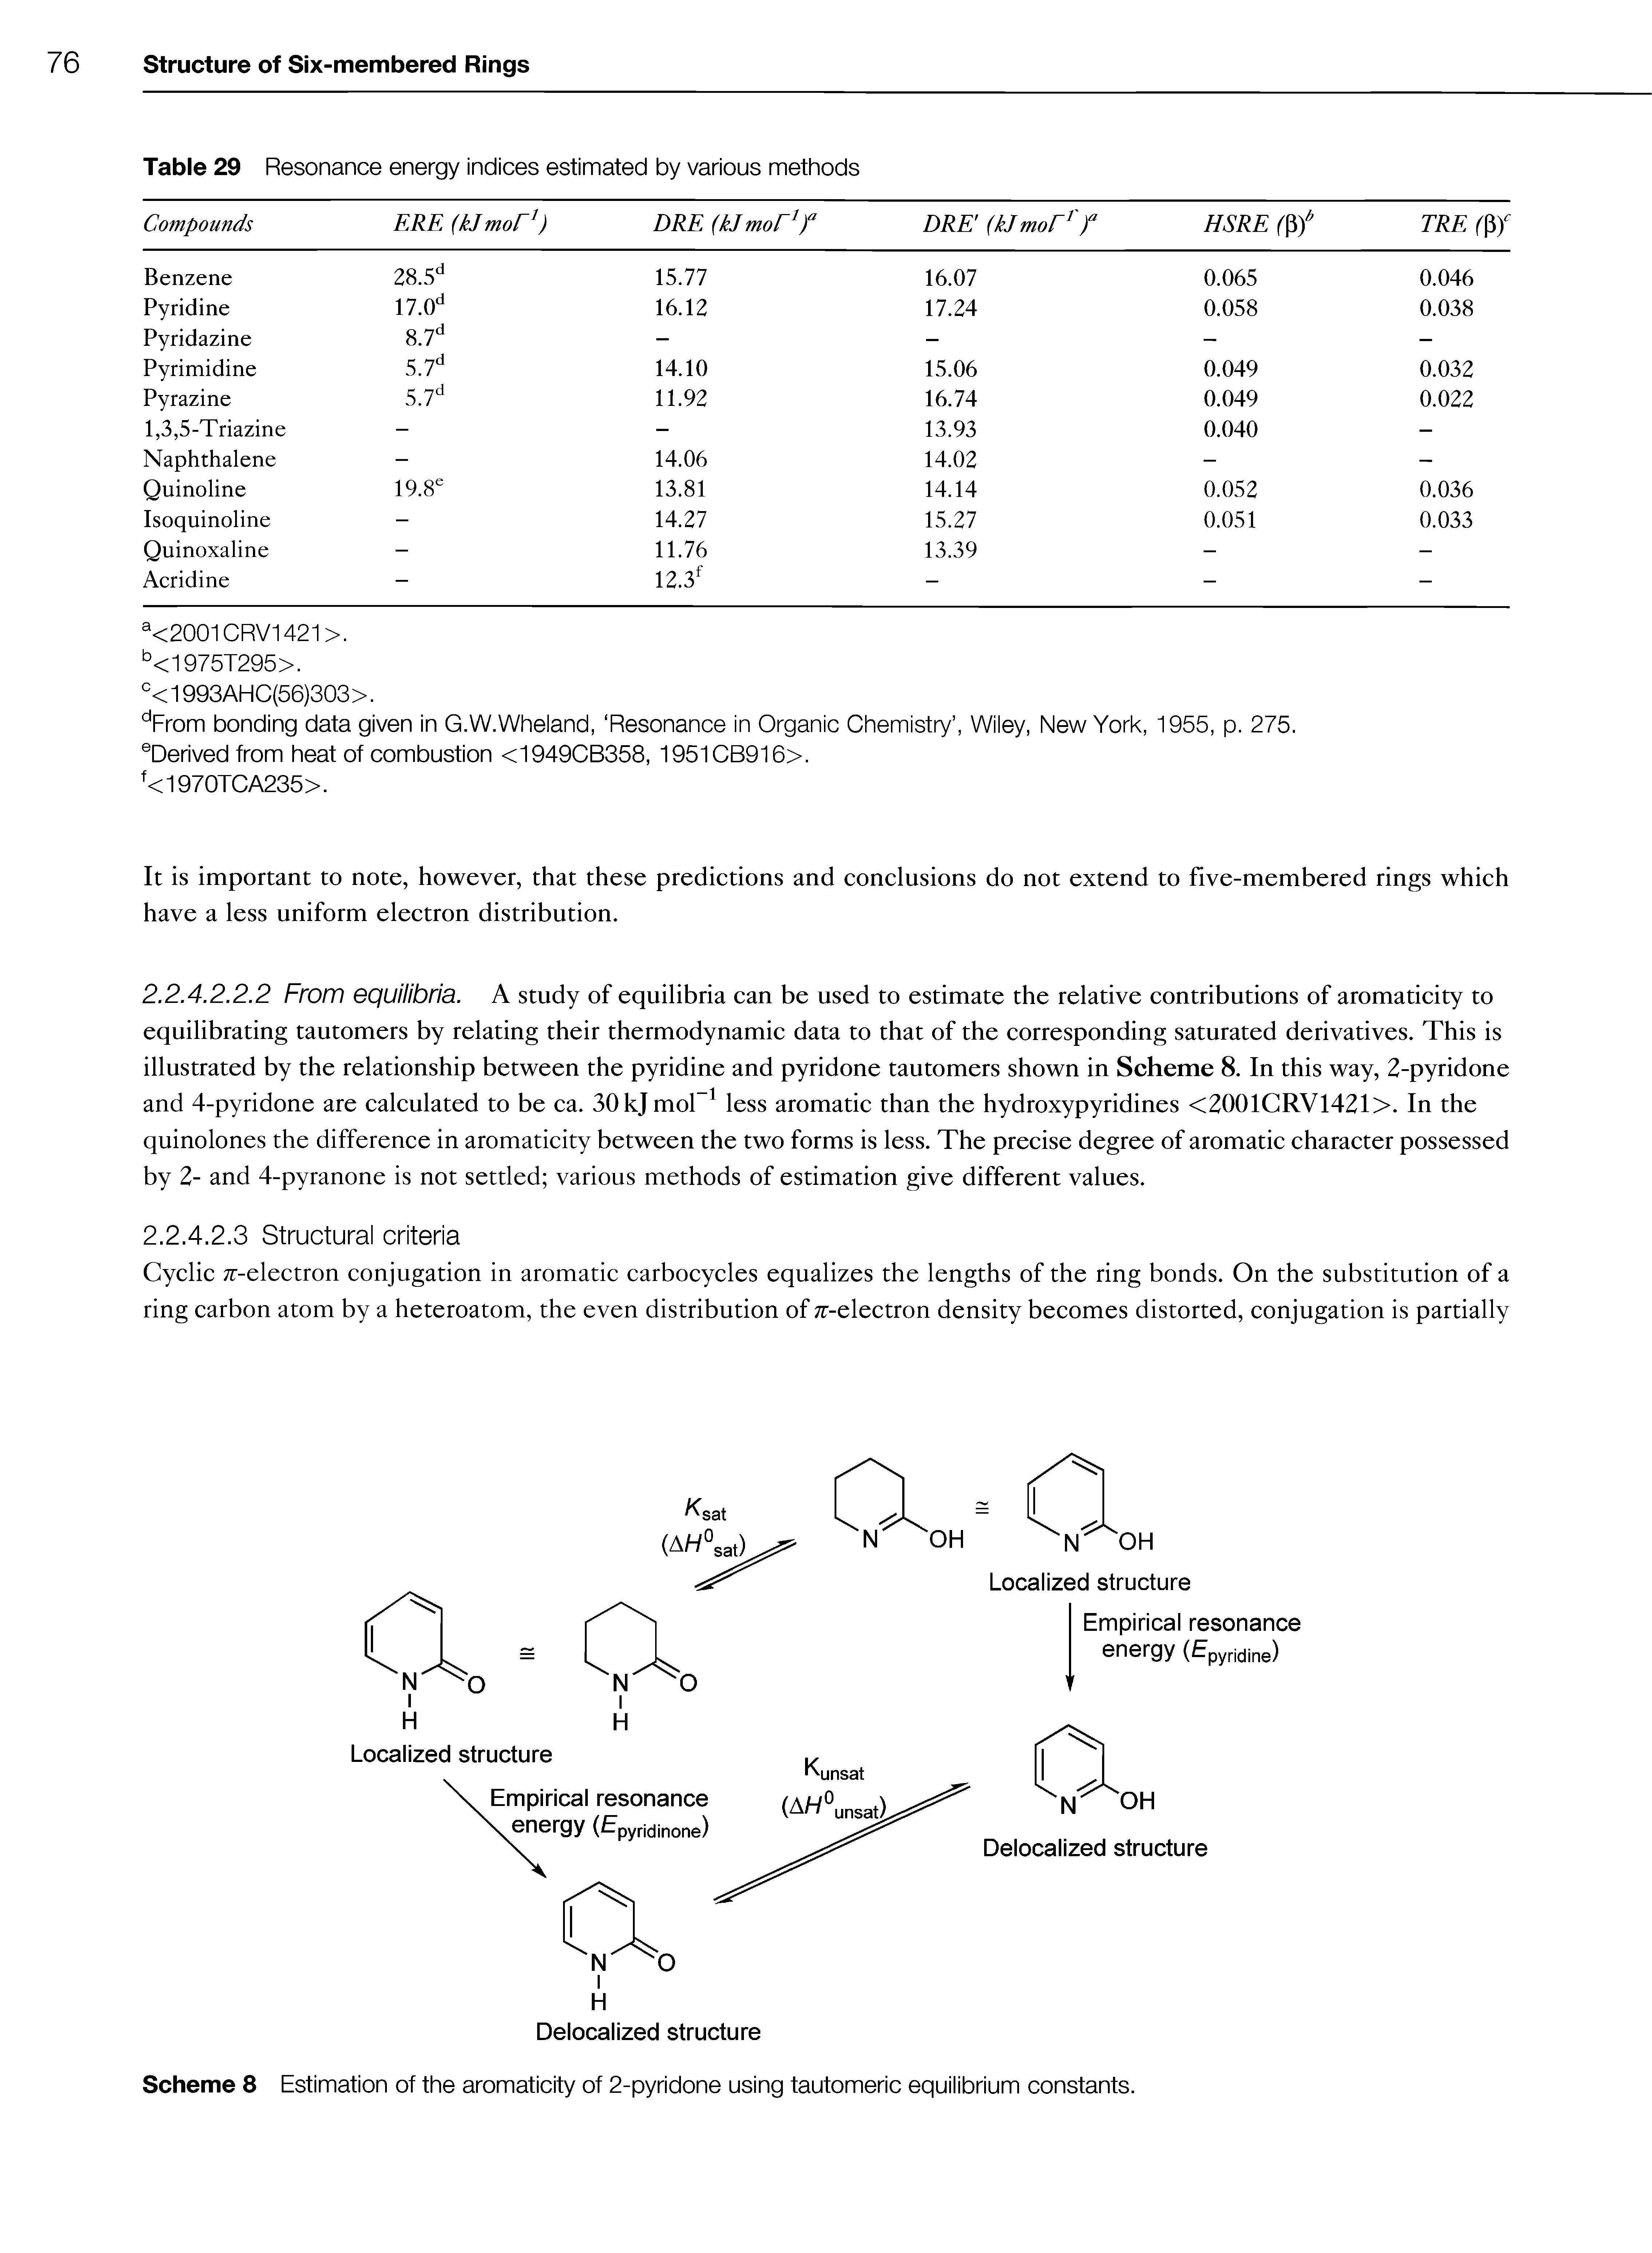 Scheme 8 Estimation of the aromaticity of 2-pyridone using tautomeric equilibrium constants.